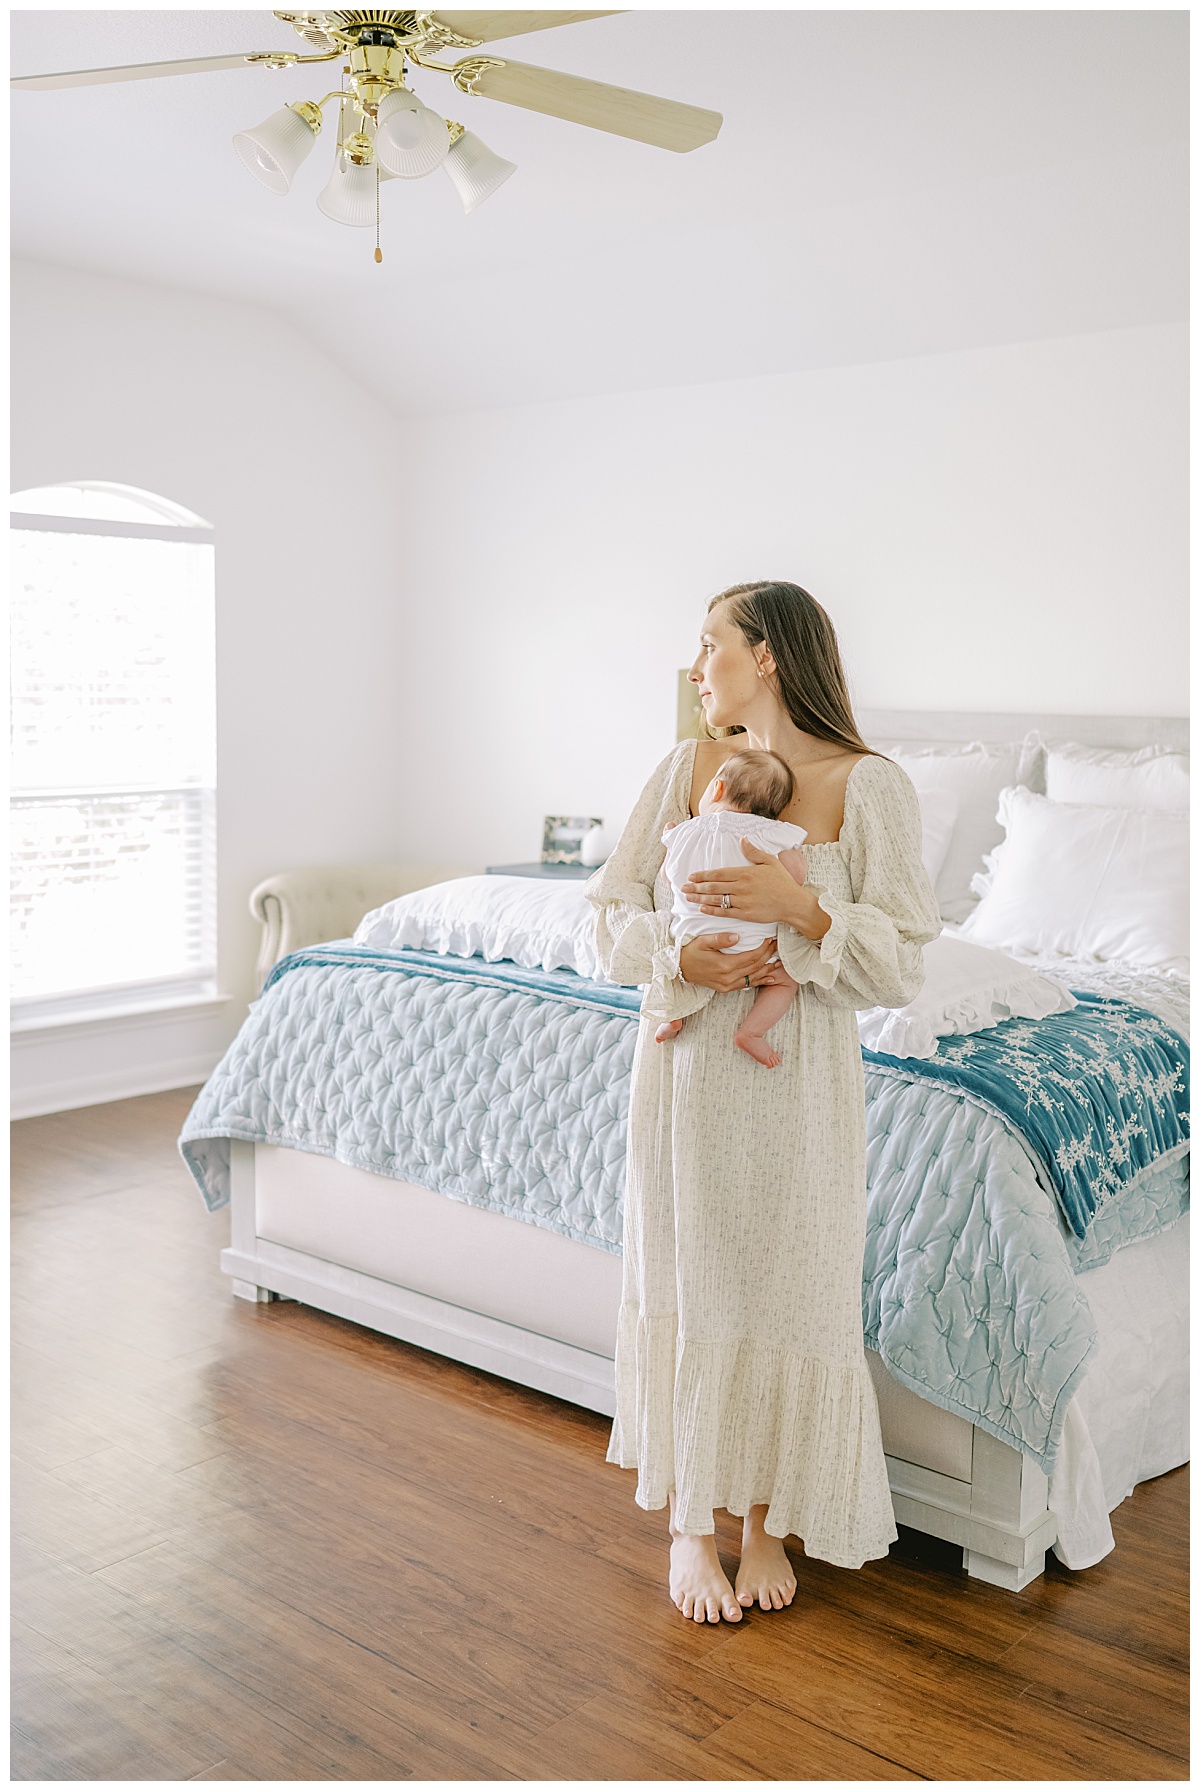 Mom holding baby girl in the master bedroom for their in-home newborn session in San Antonio, TX by Teressa Jane Photography.